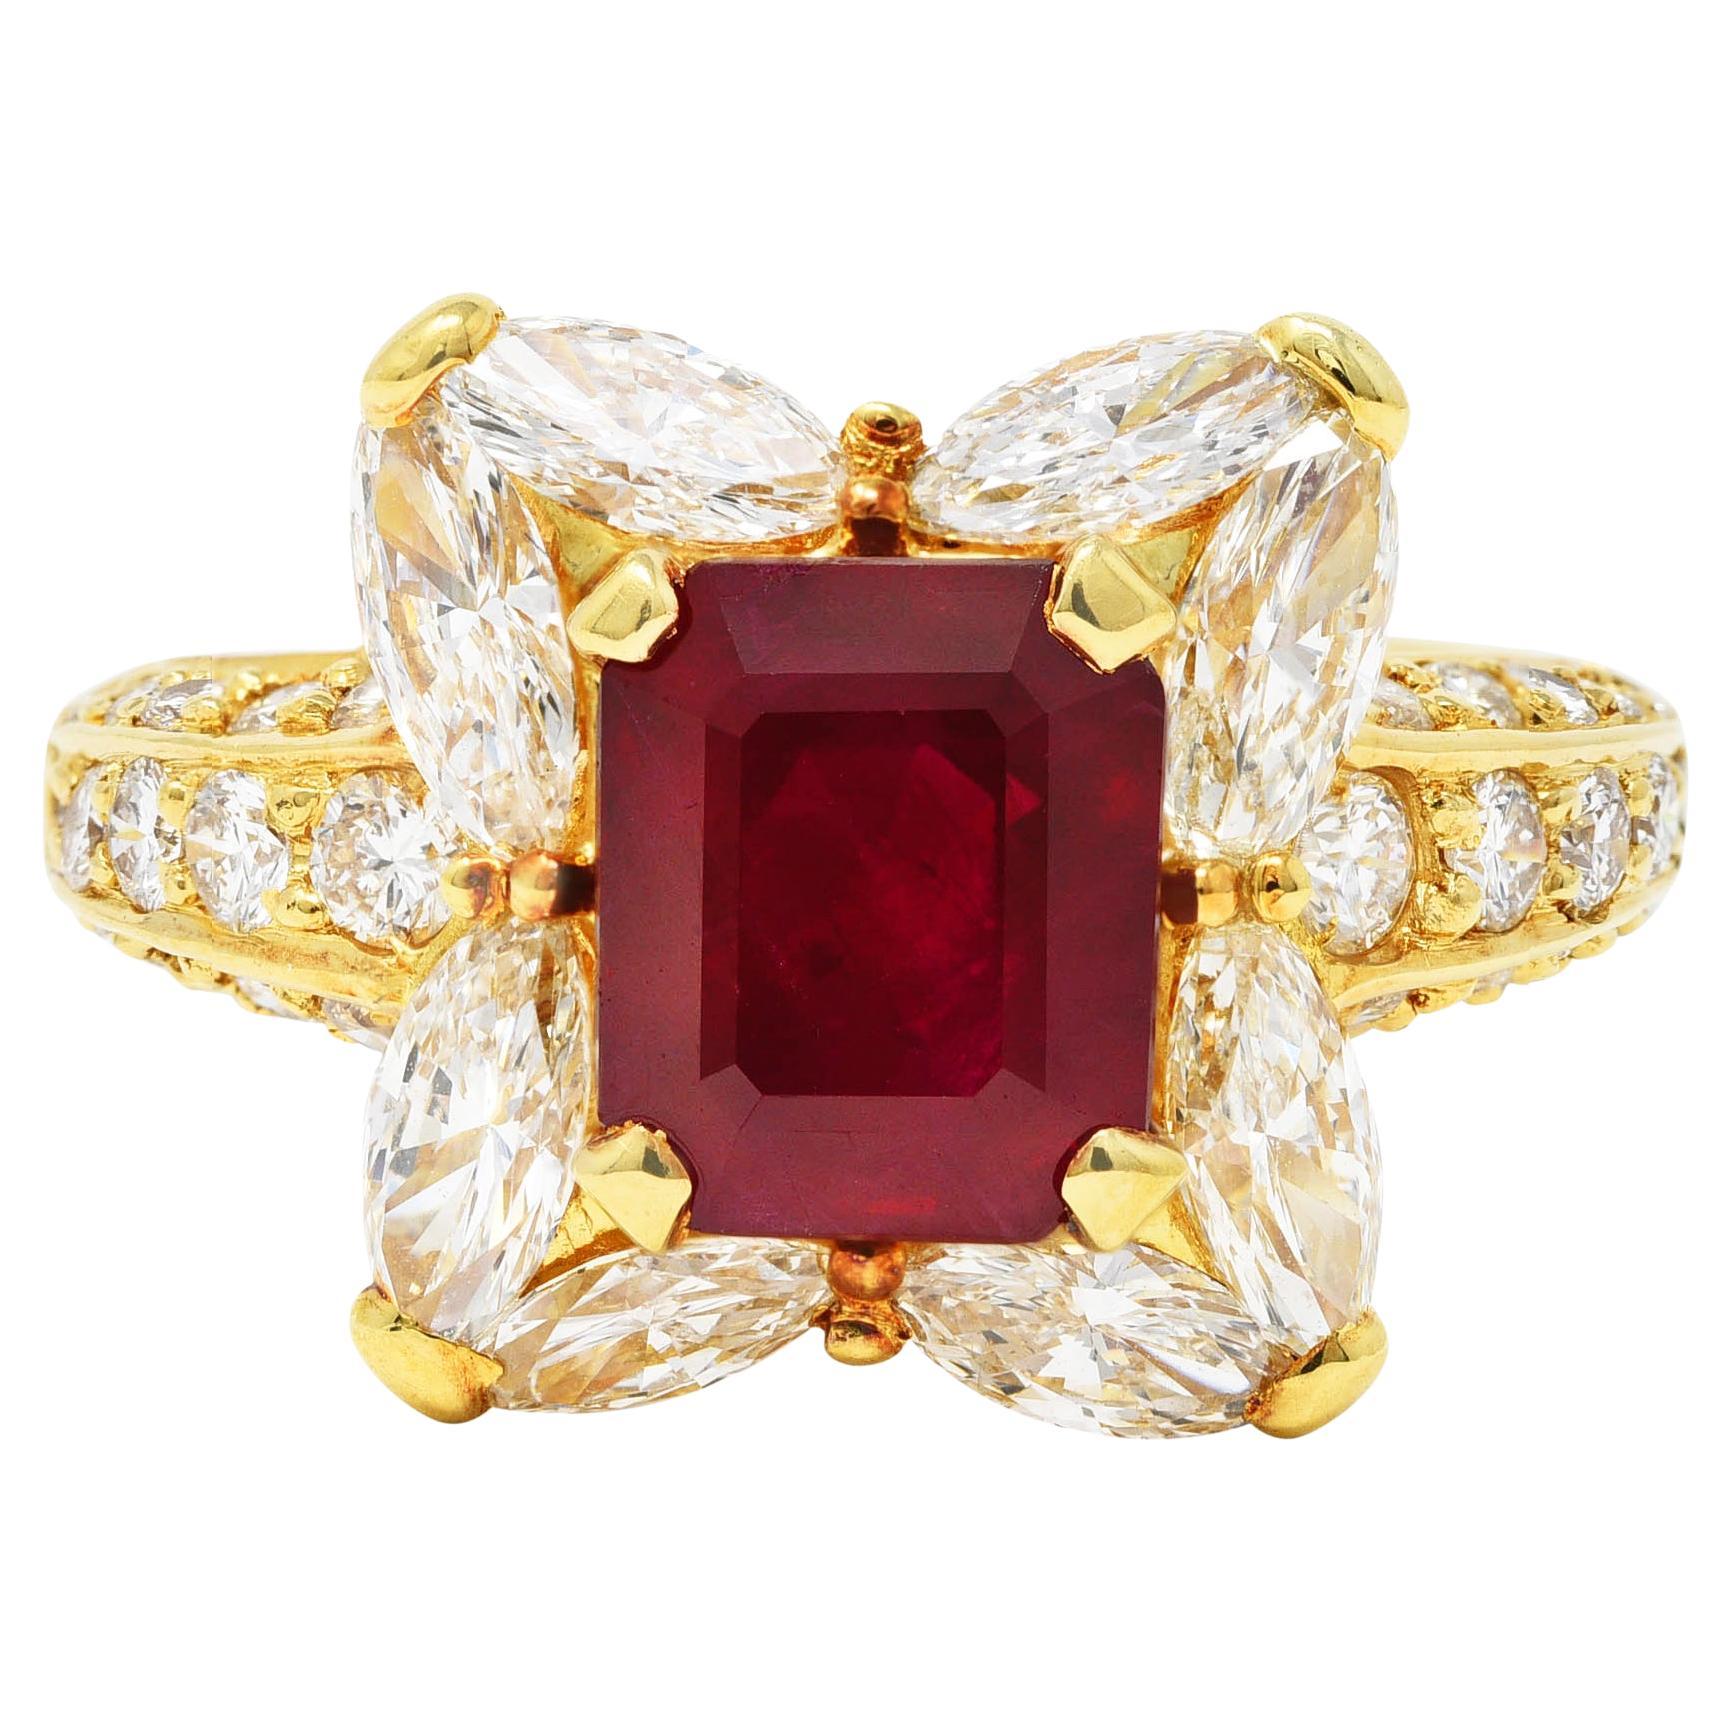 Vintage 3.49 Carats Emerald Cut Ruby Diamond 18 Karat Yellow Gold Cluster Ring For Sale